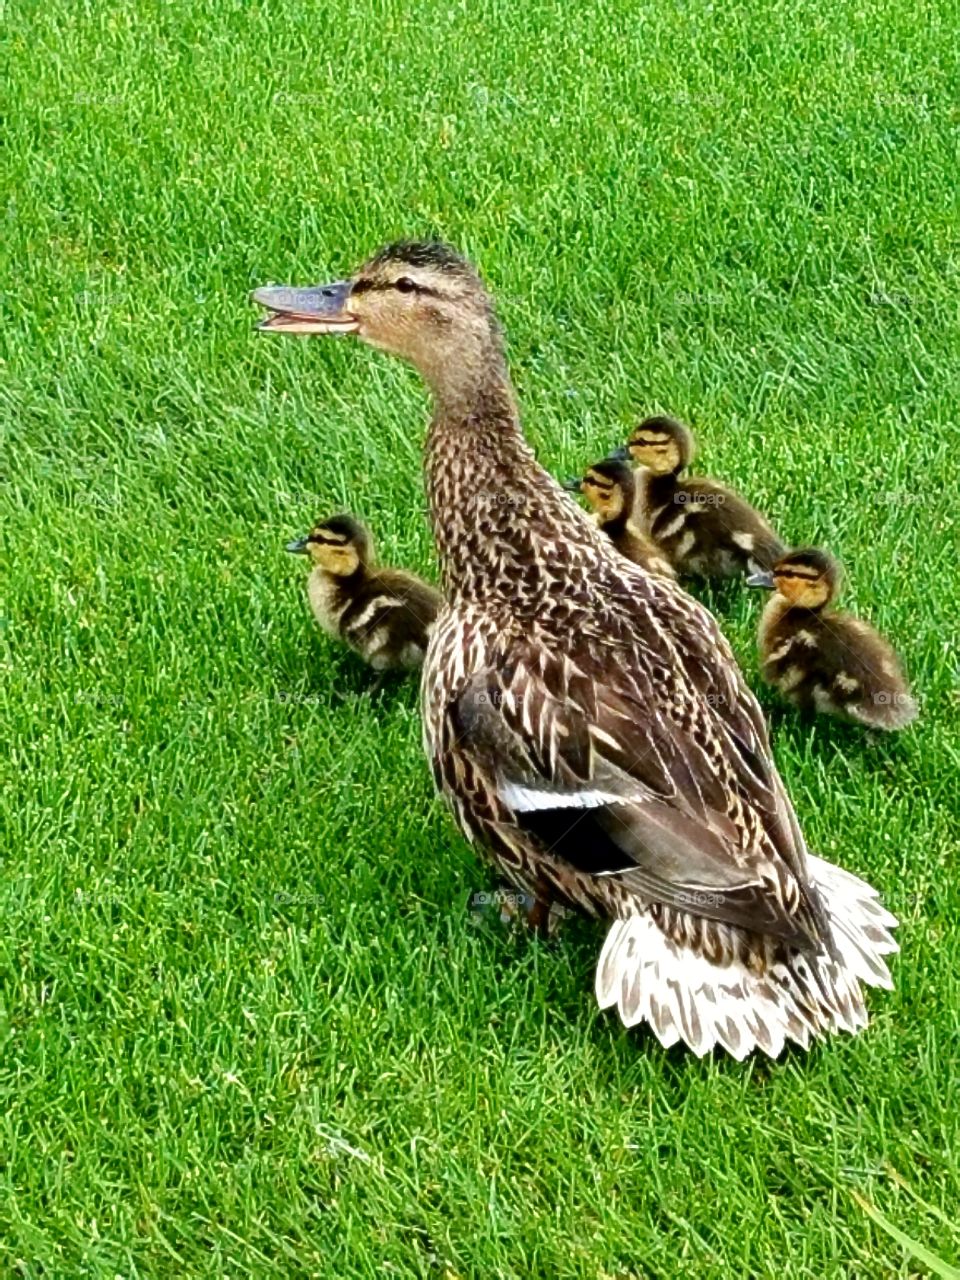 Momma duck and her ducklings following her.